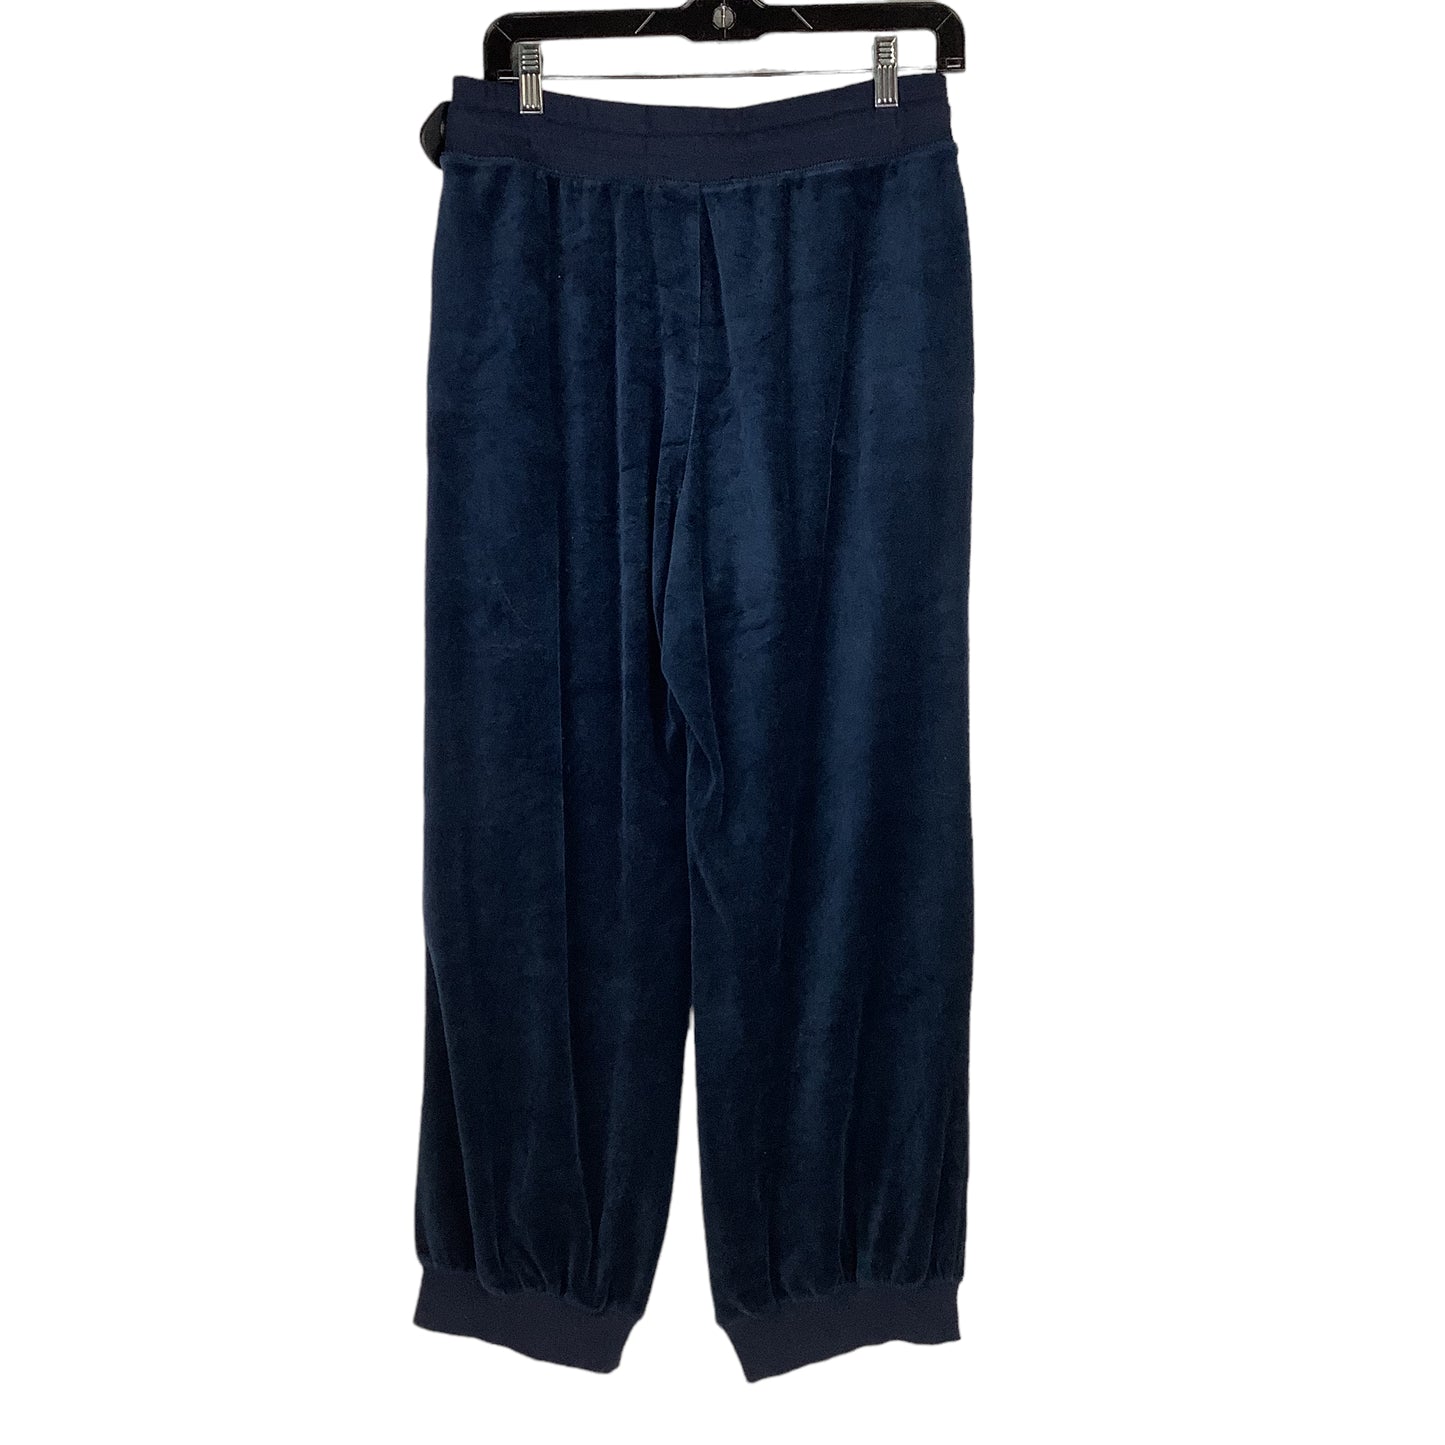 Athletic Pants By J Crew  Size: S